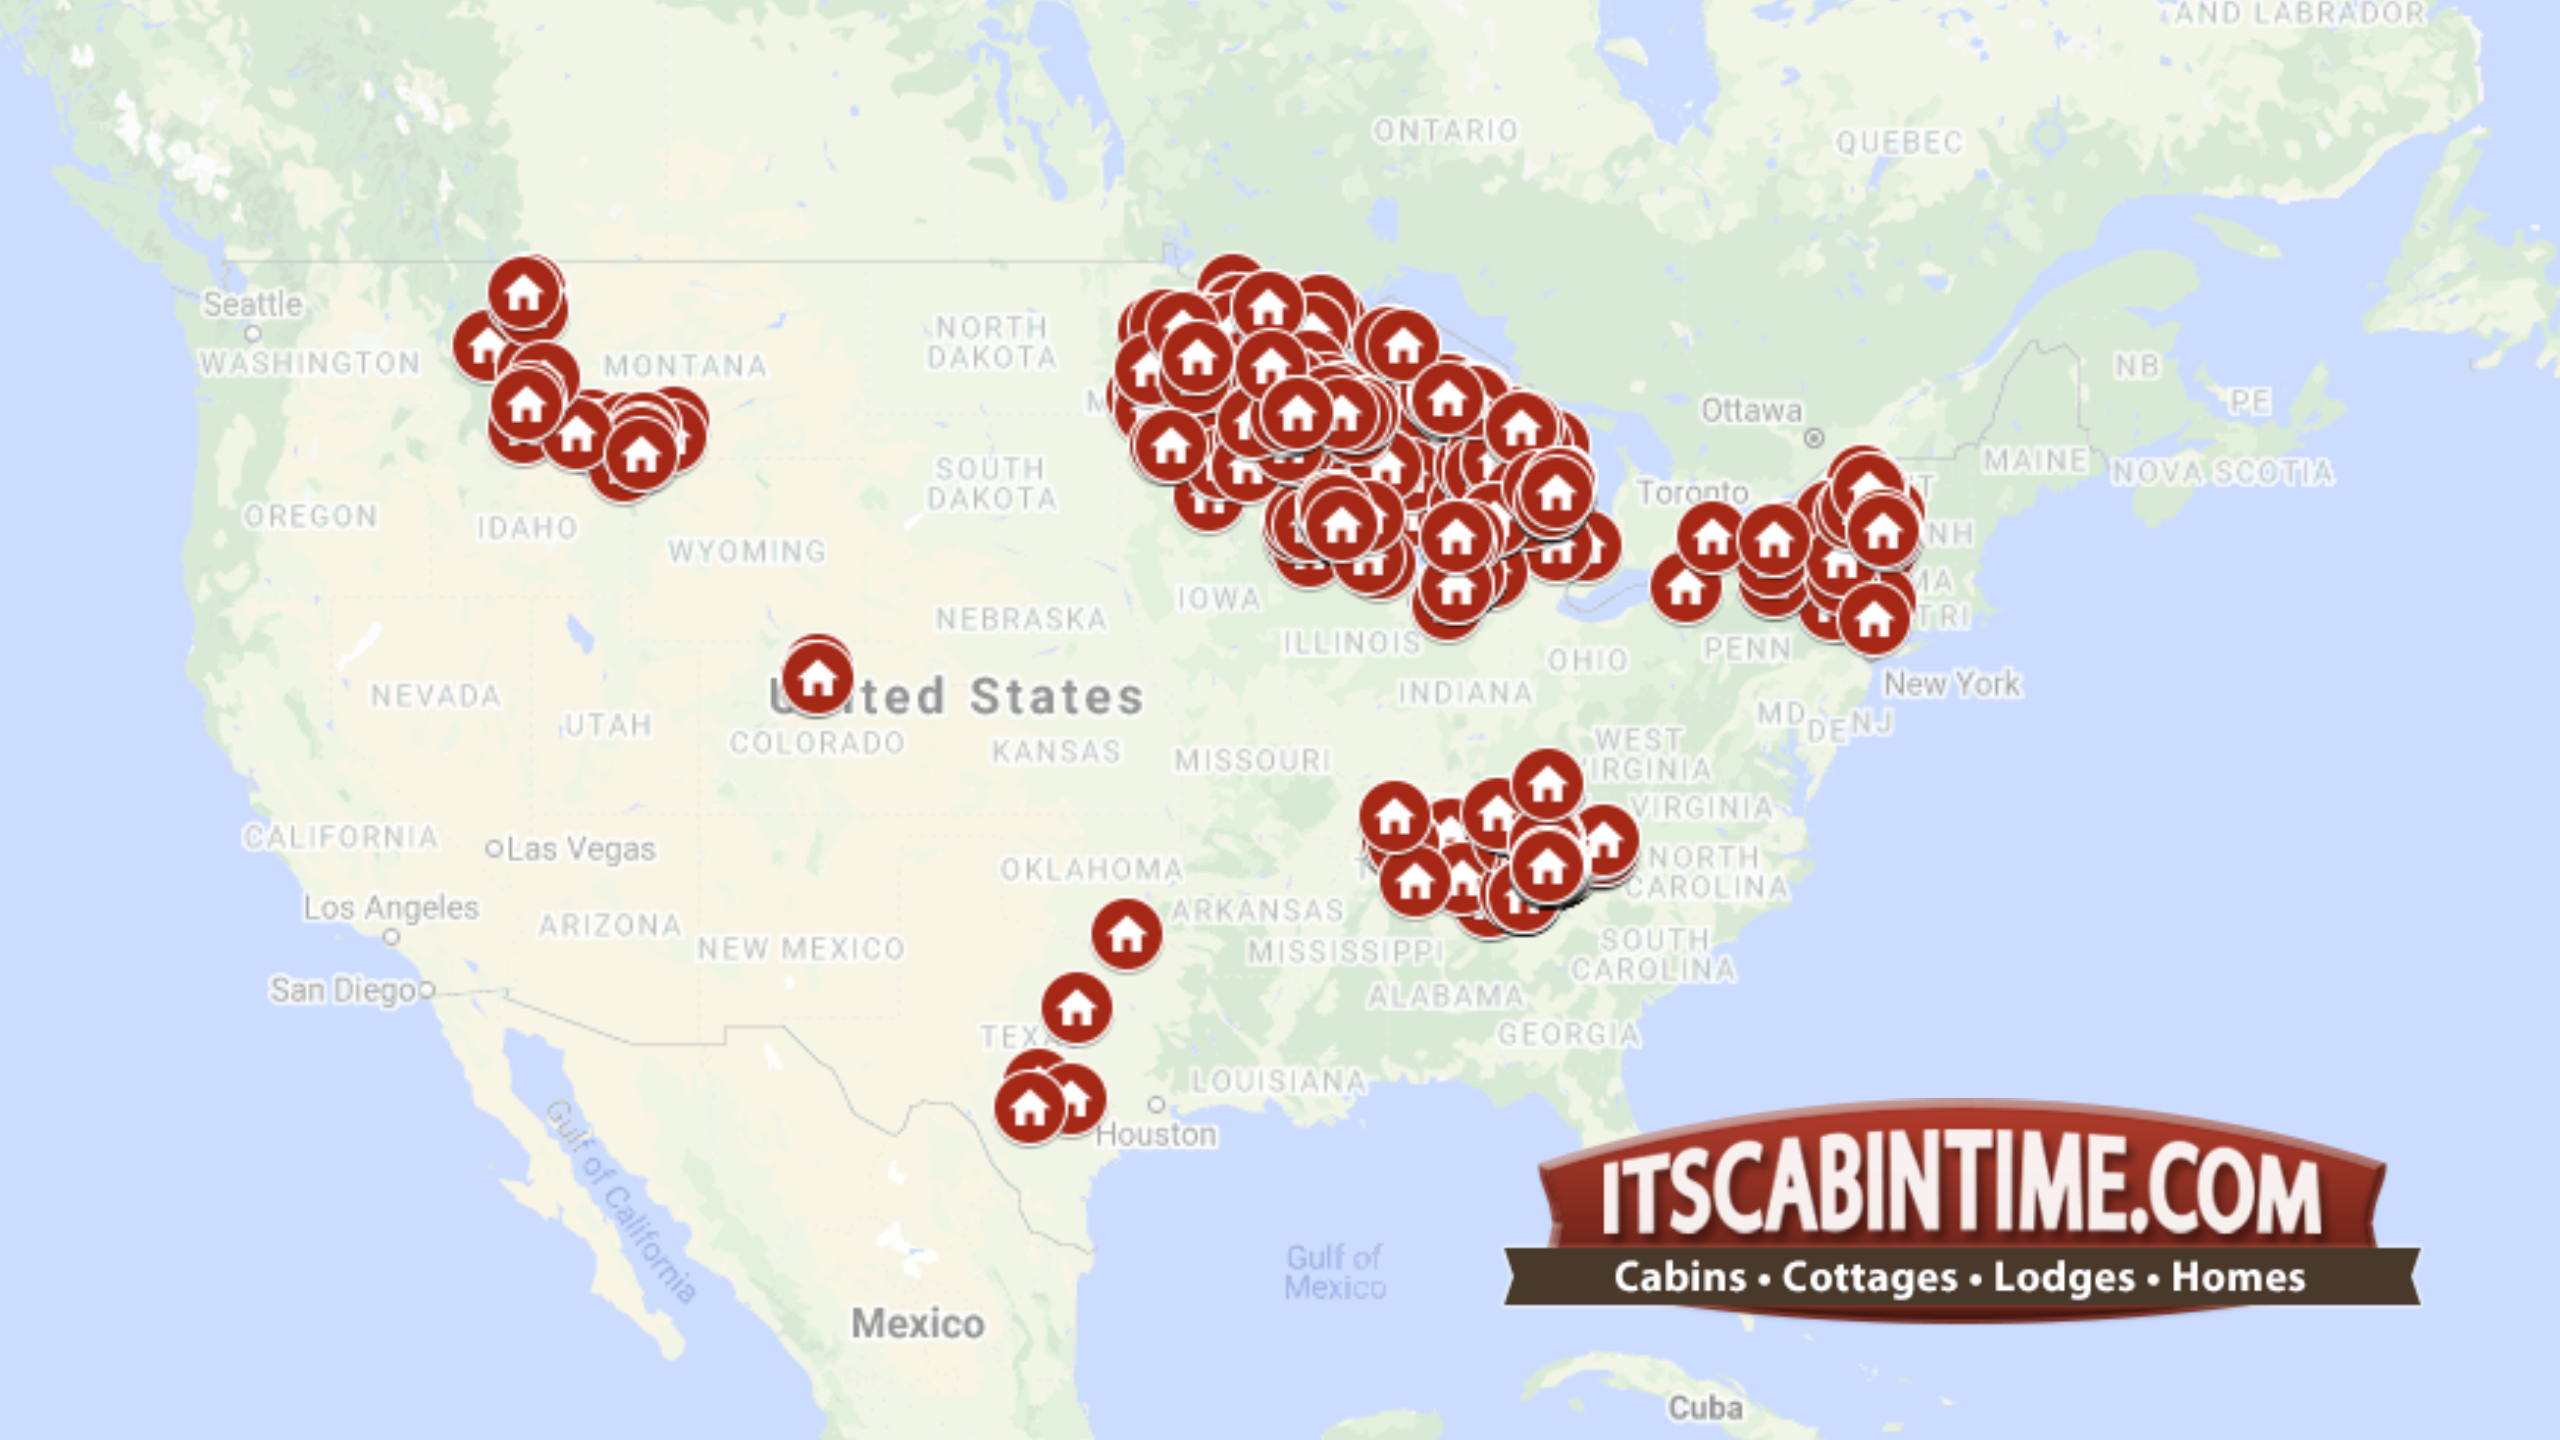 Visit www.itscabintime.com to see new cabin pins in Texas, Oklahoma and Colorado!